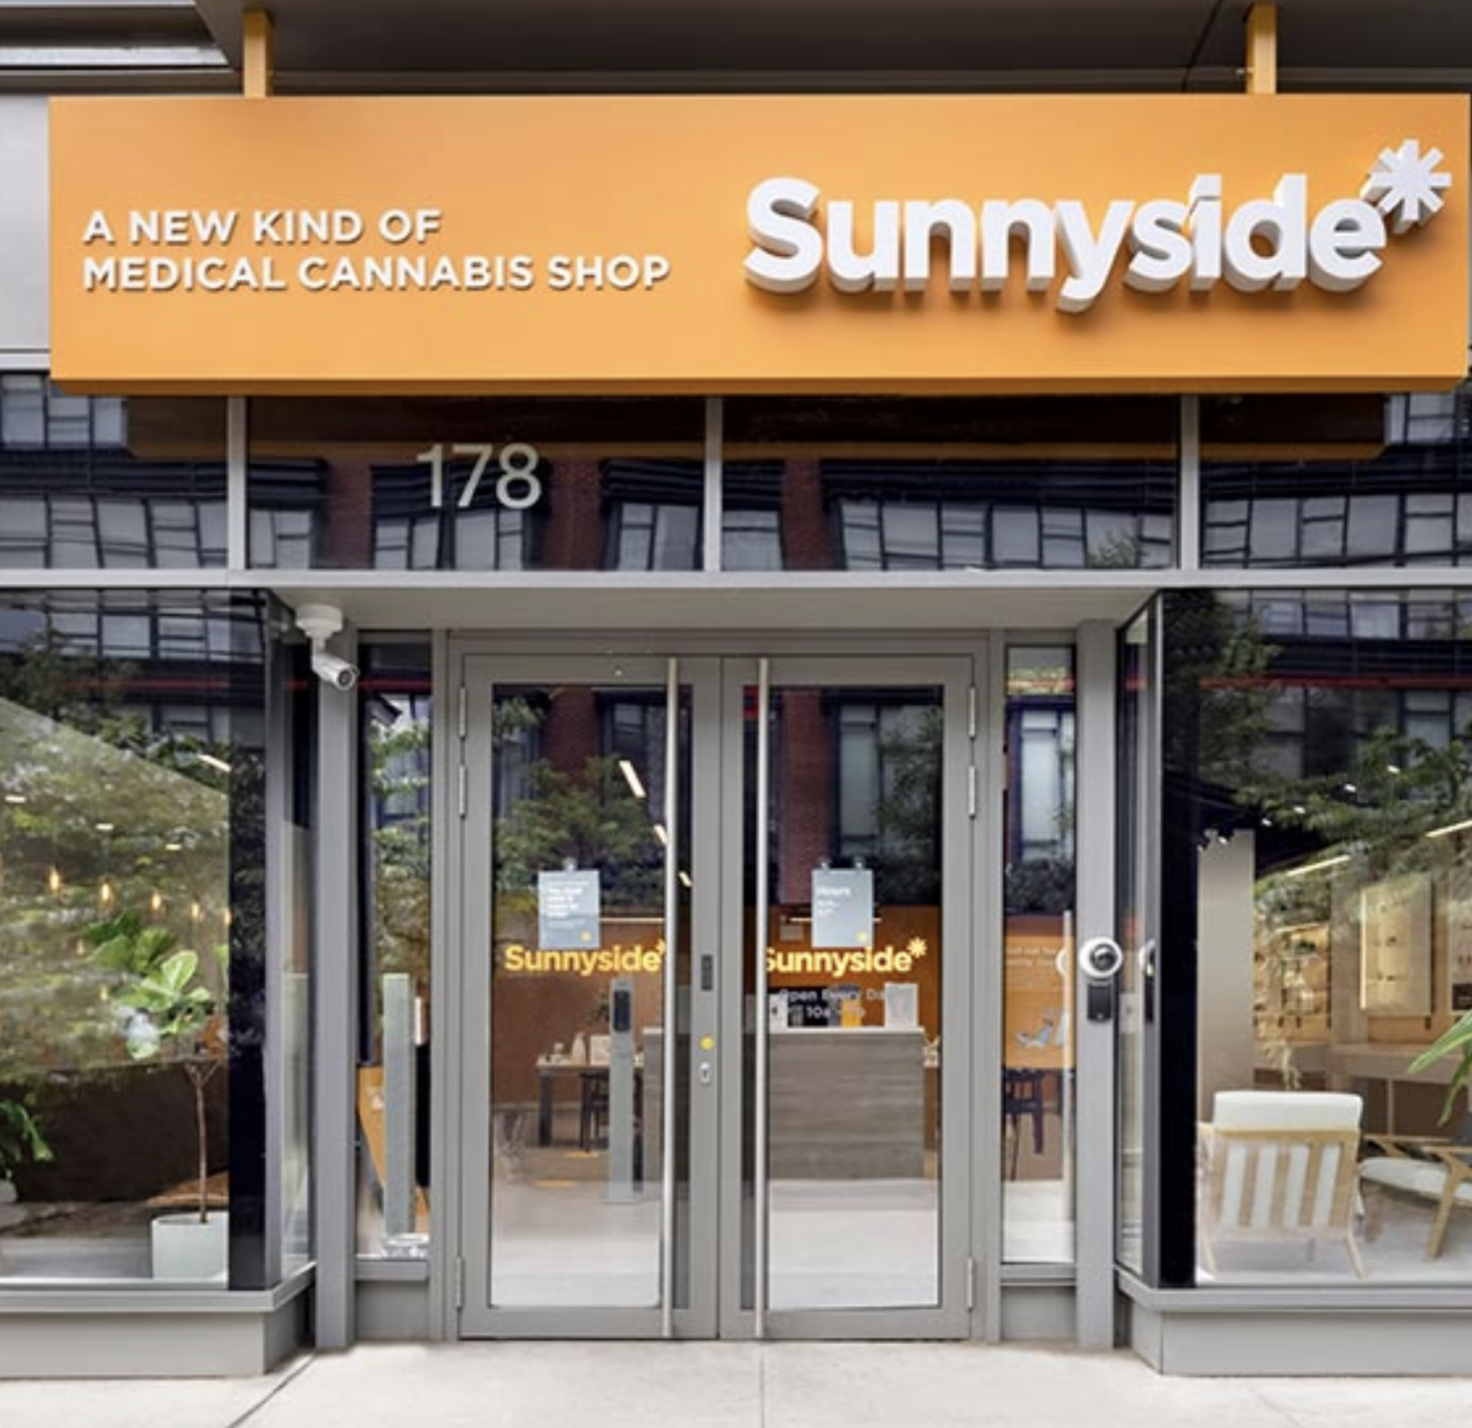 The Sunnyside is a new type of medical marijuana dispensary in NYC